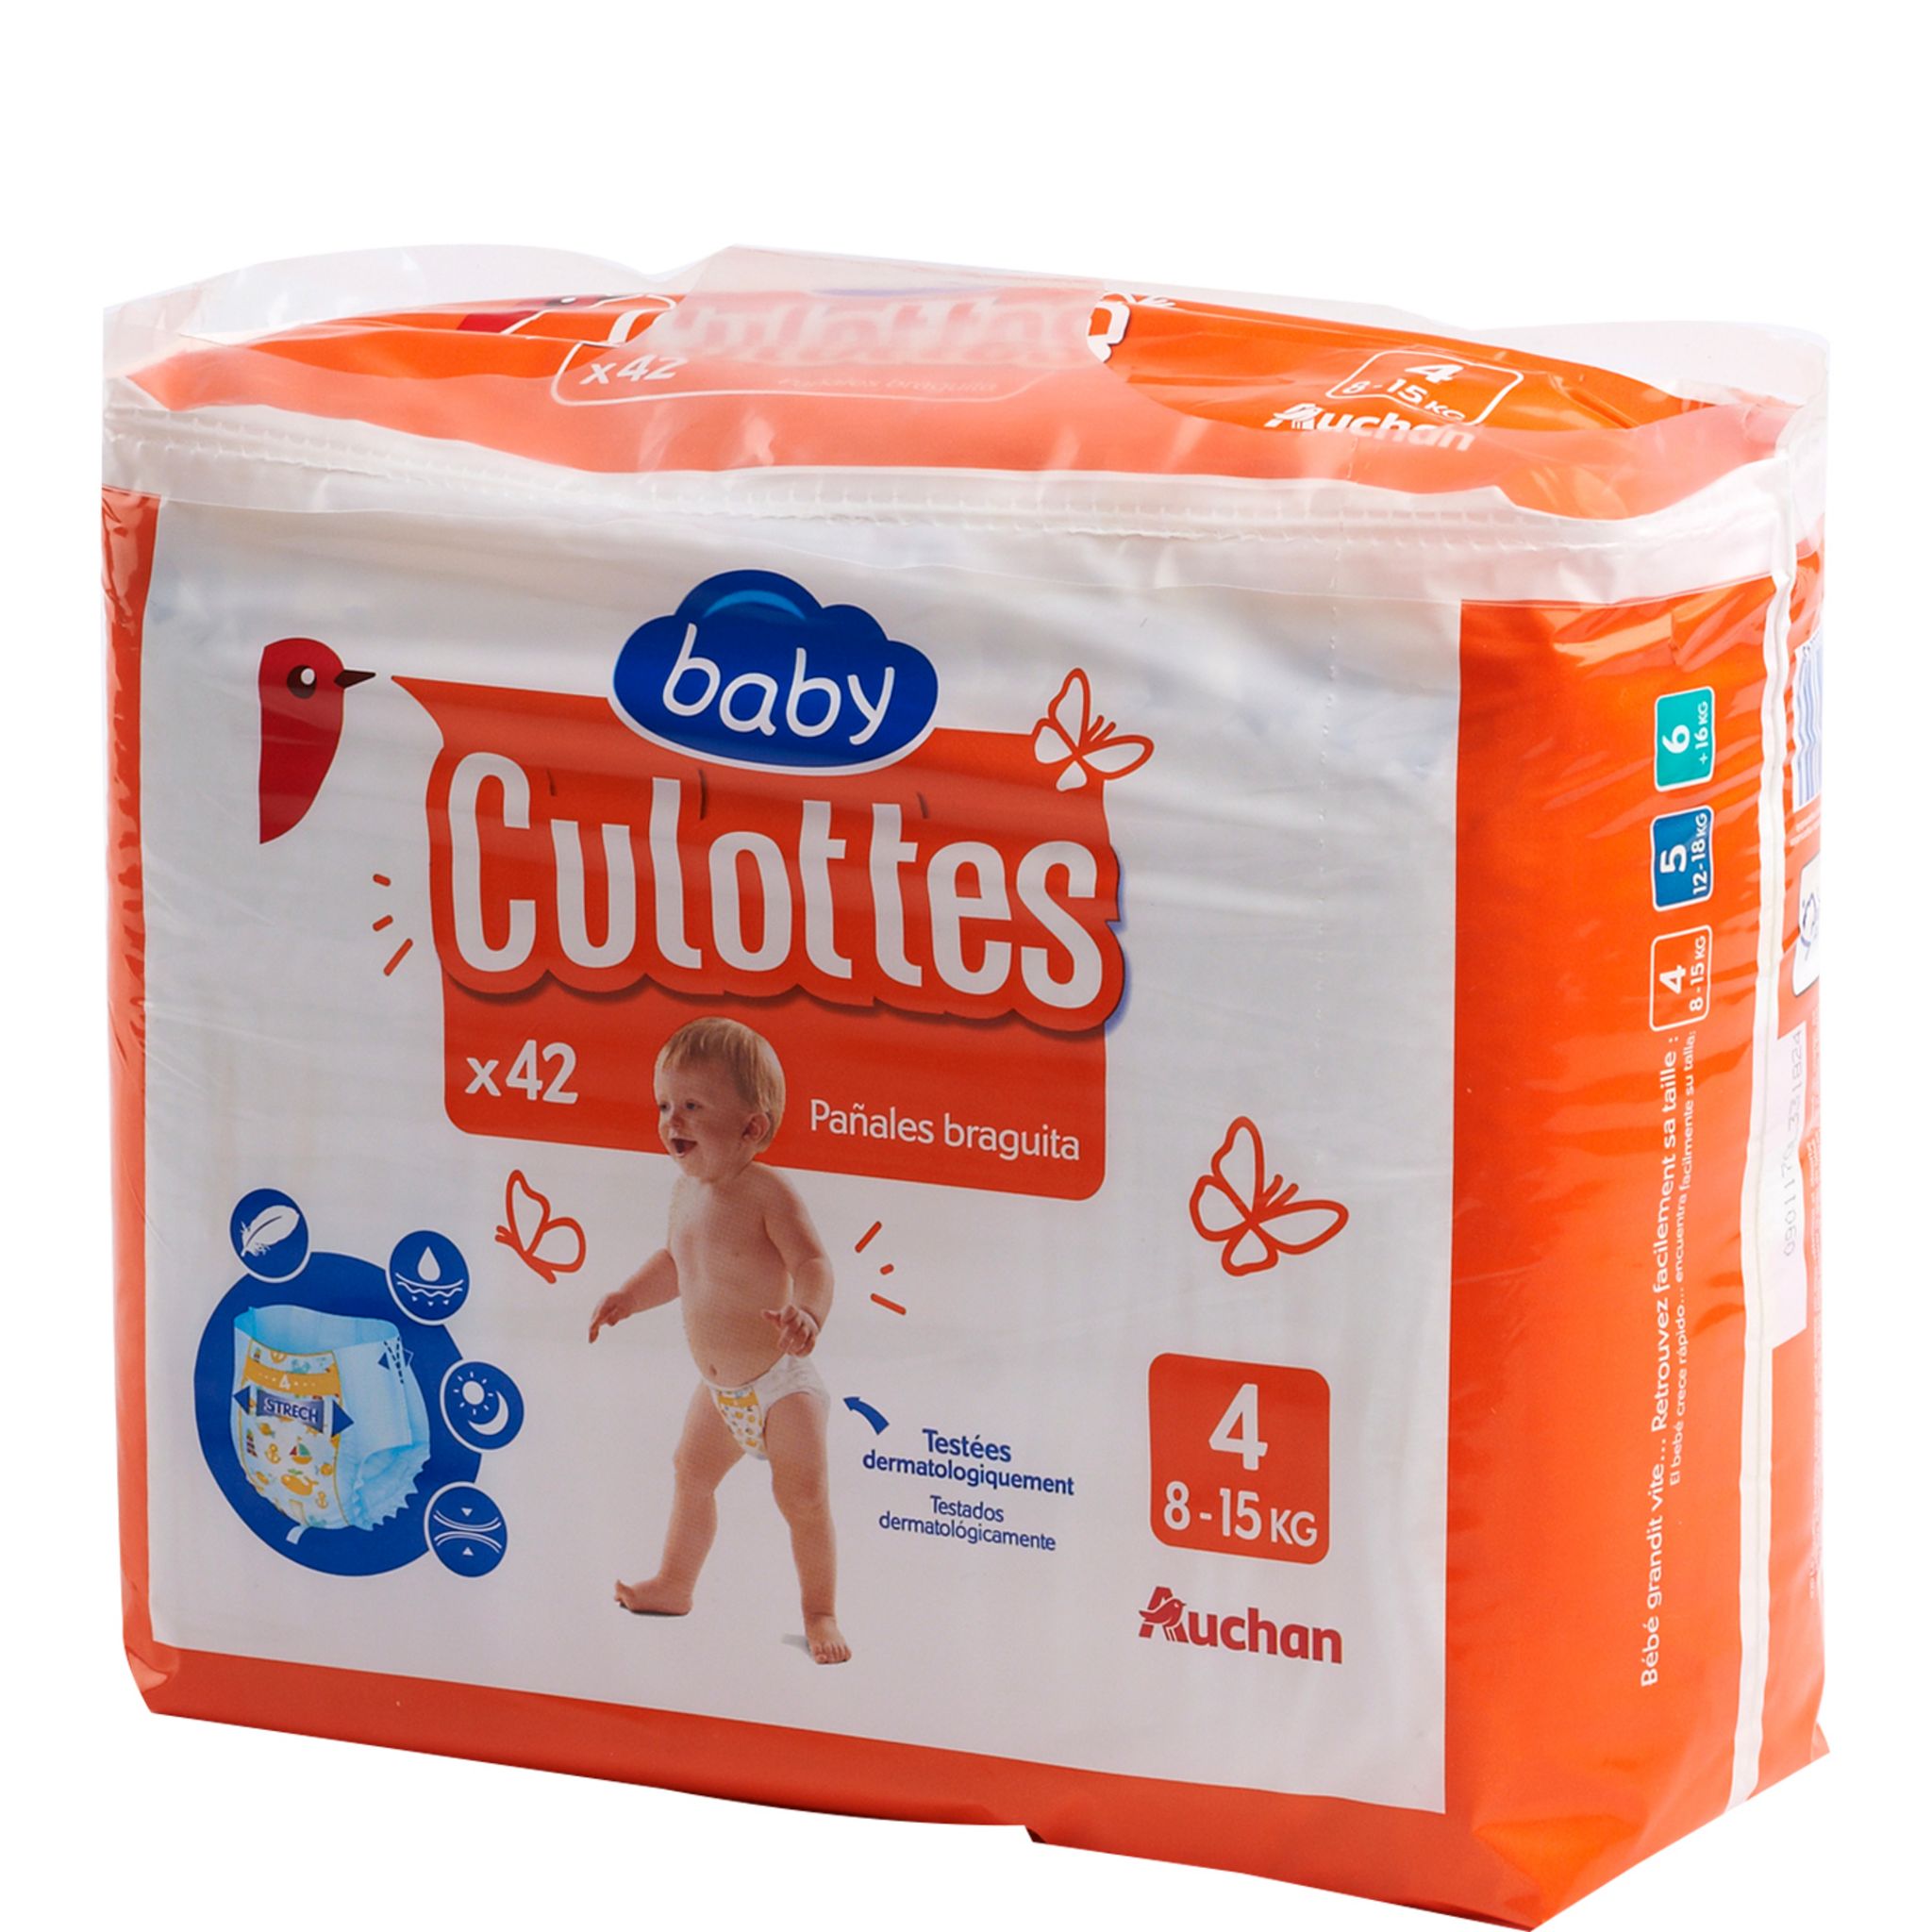 Couches-culottes bebe taille 4 (8-15kg) - 22 culottes - LP